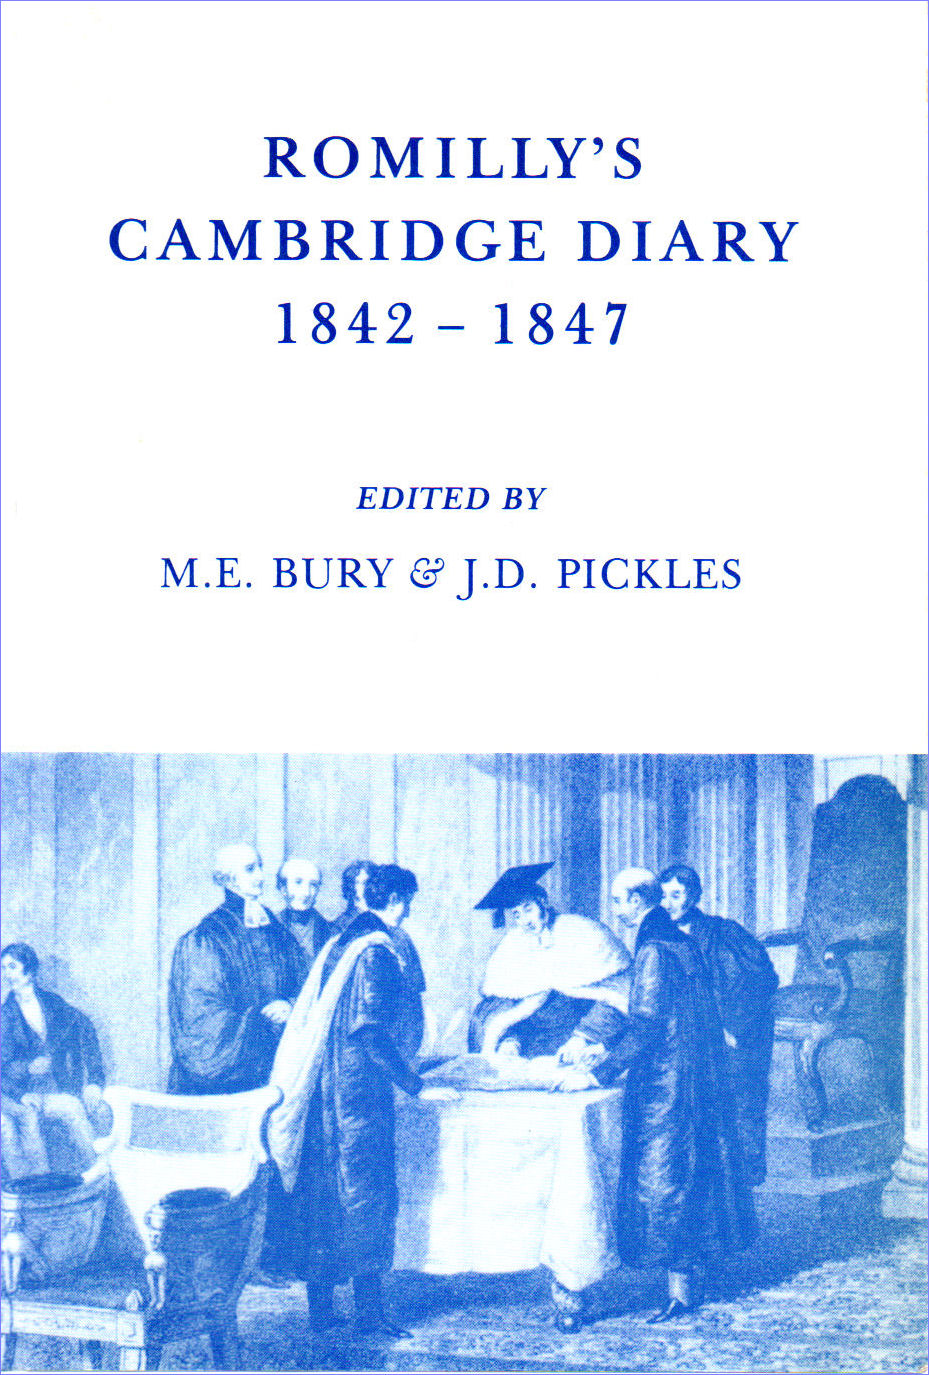 10. Romilly's Cambridge Diary 1842-1847. Edited by M.E. Bury and J.D. Pickles